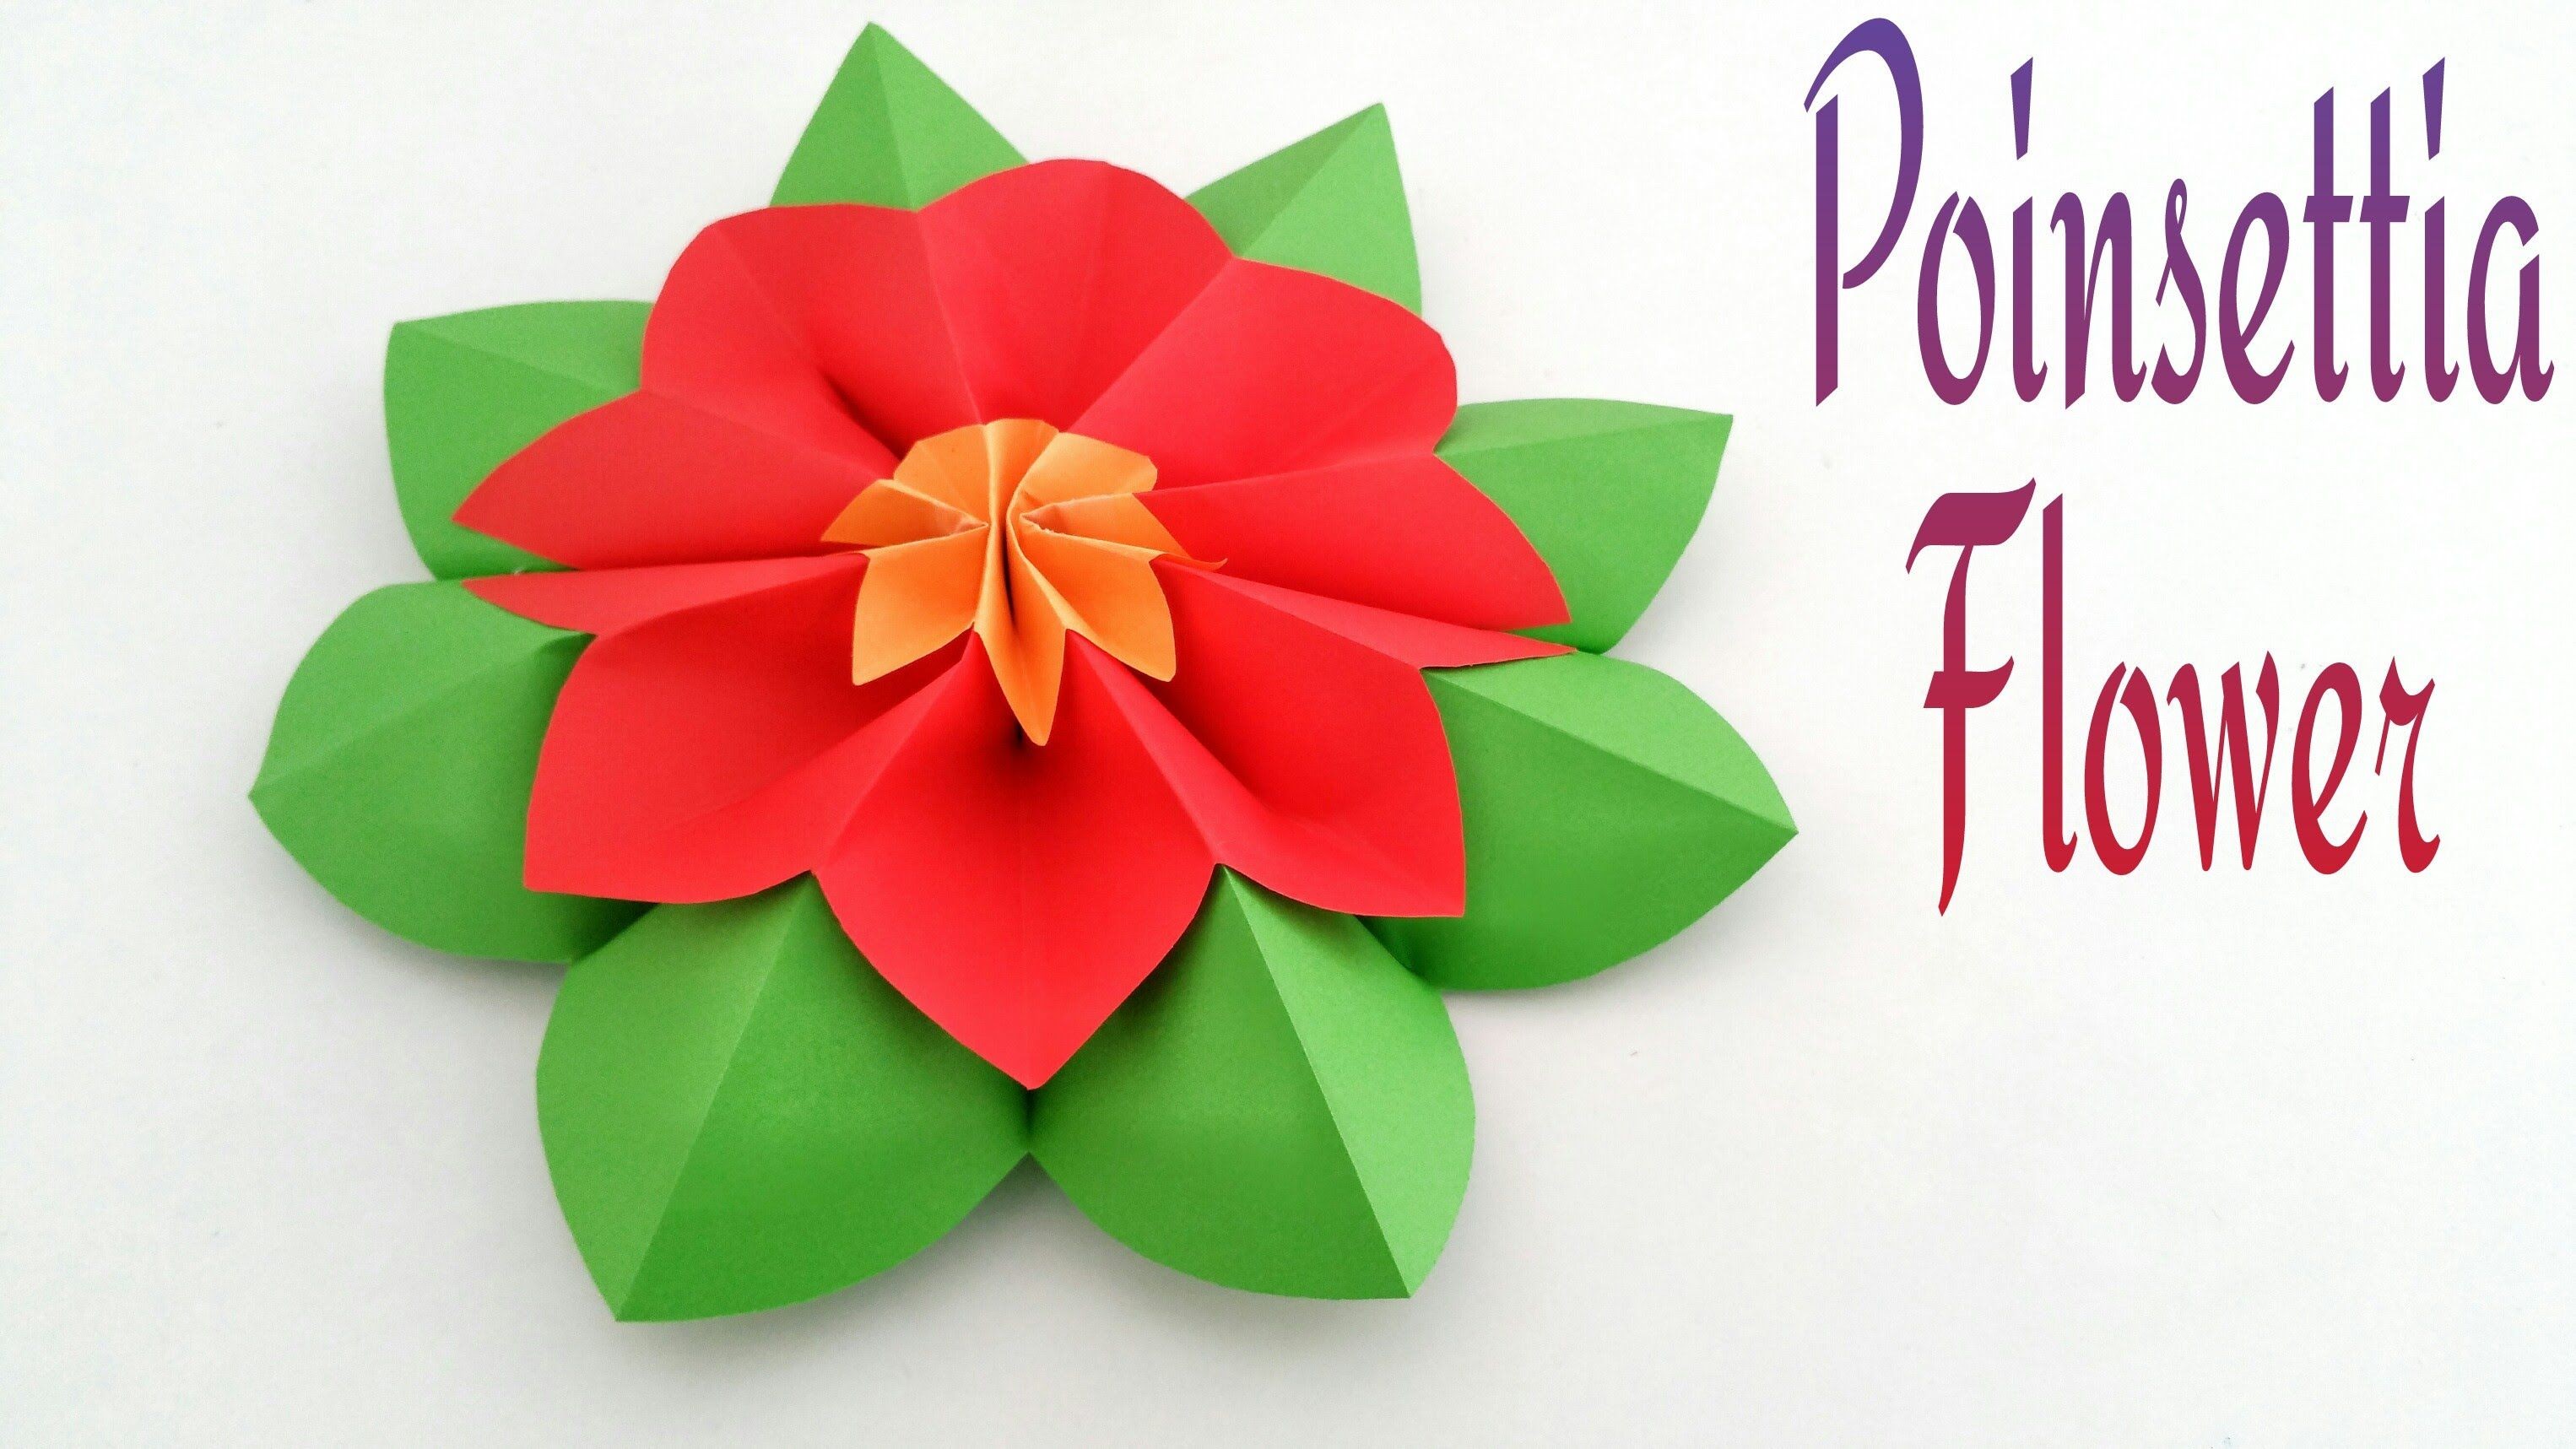 Papercraft origami Flowers How to Make A Beautiful "poinsettia Flower" origami Craft